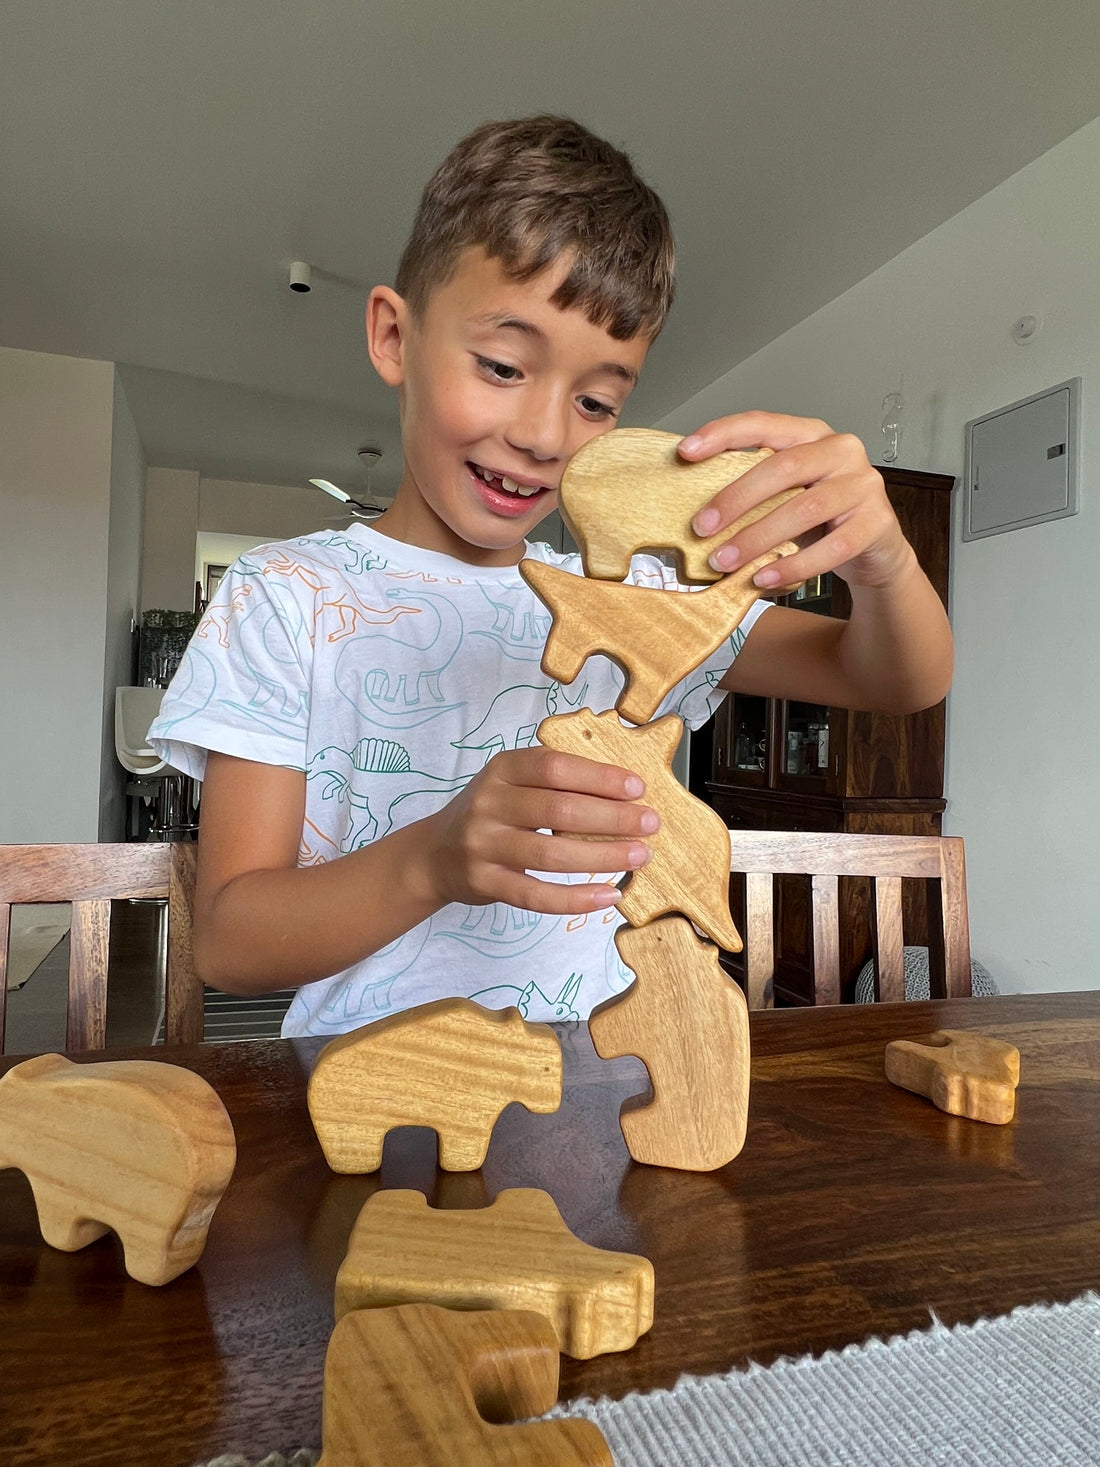 Wooden Toys: A Gateway to Imaginative Play